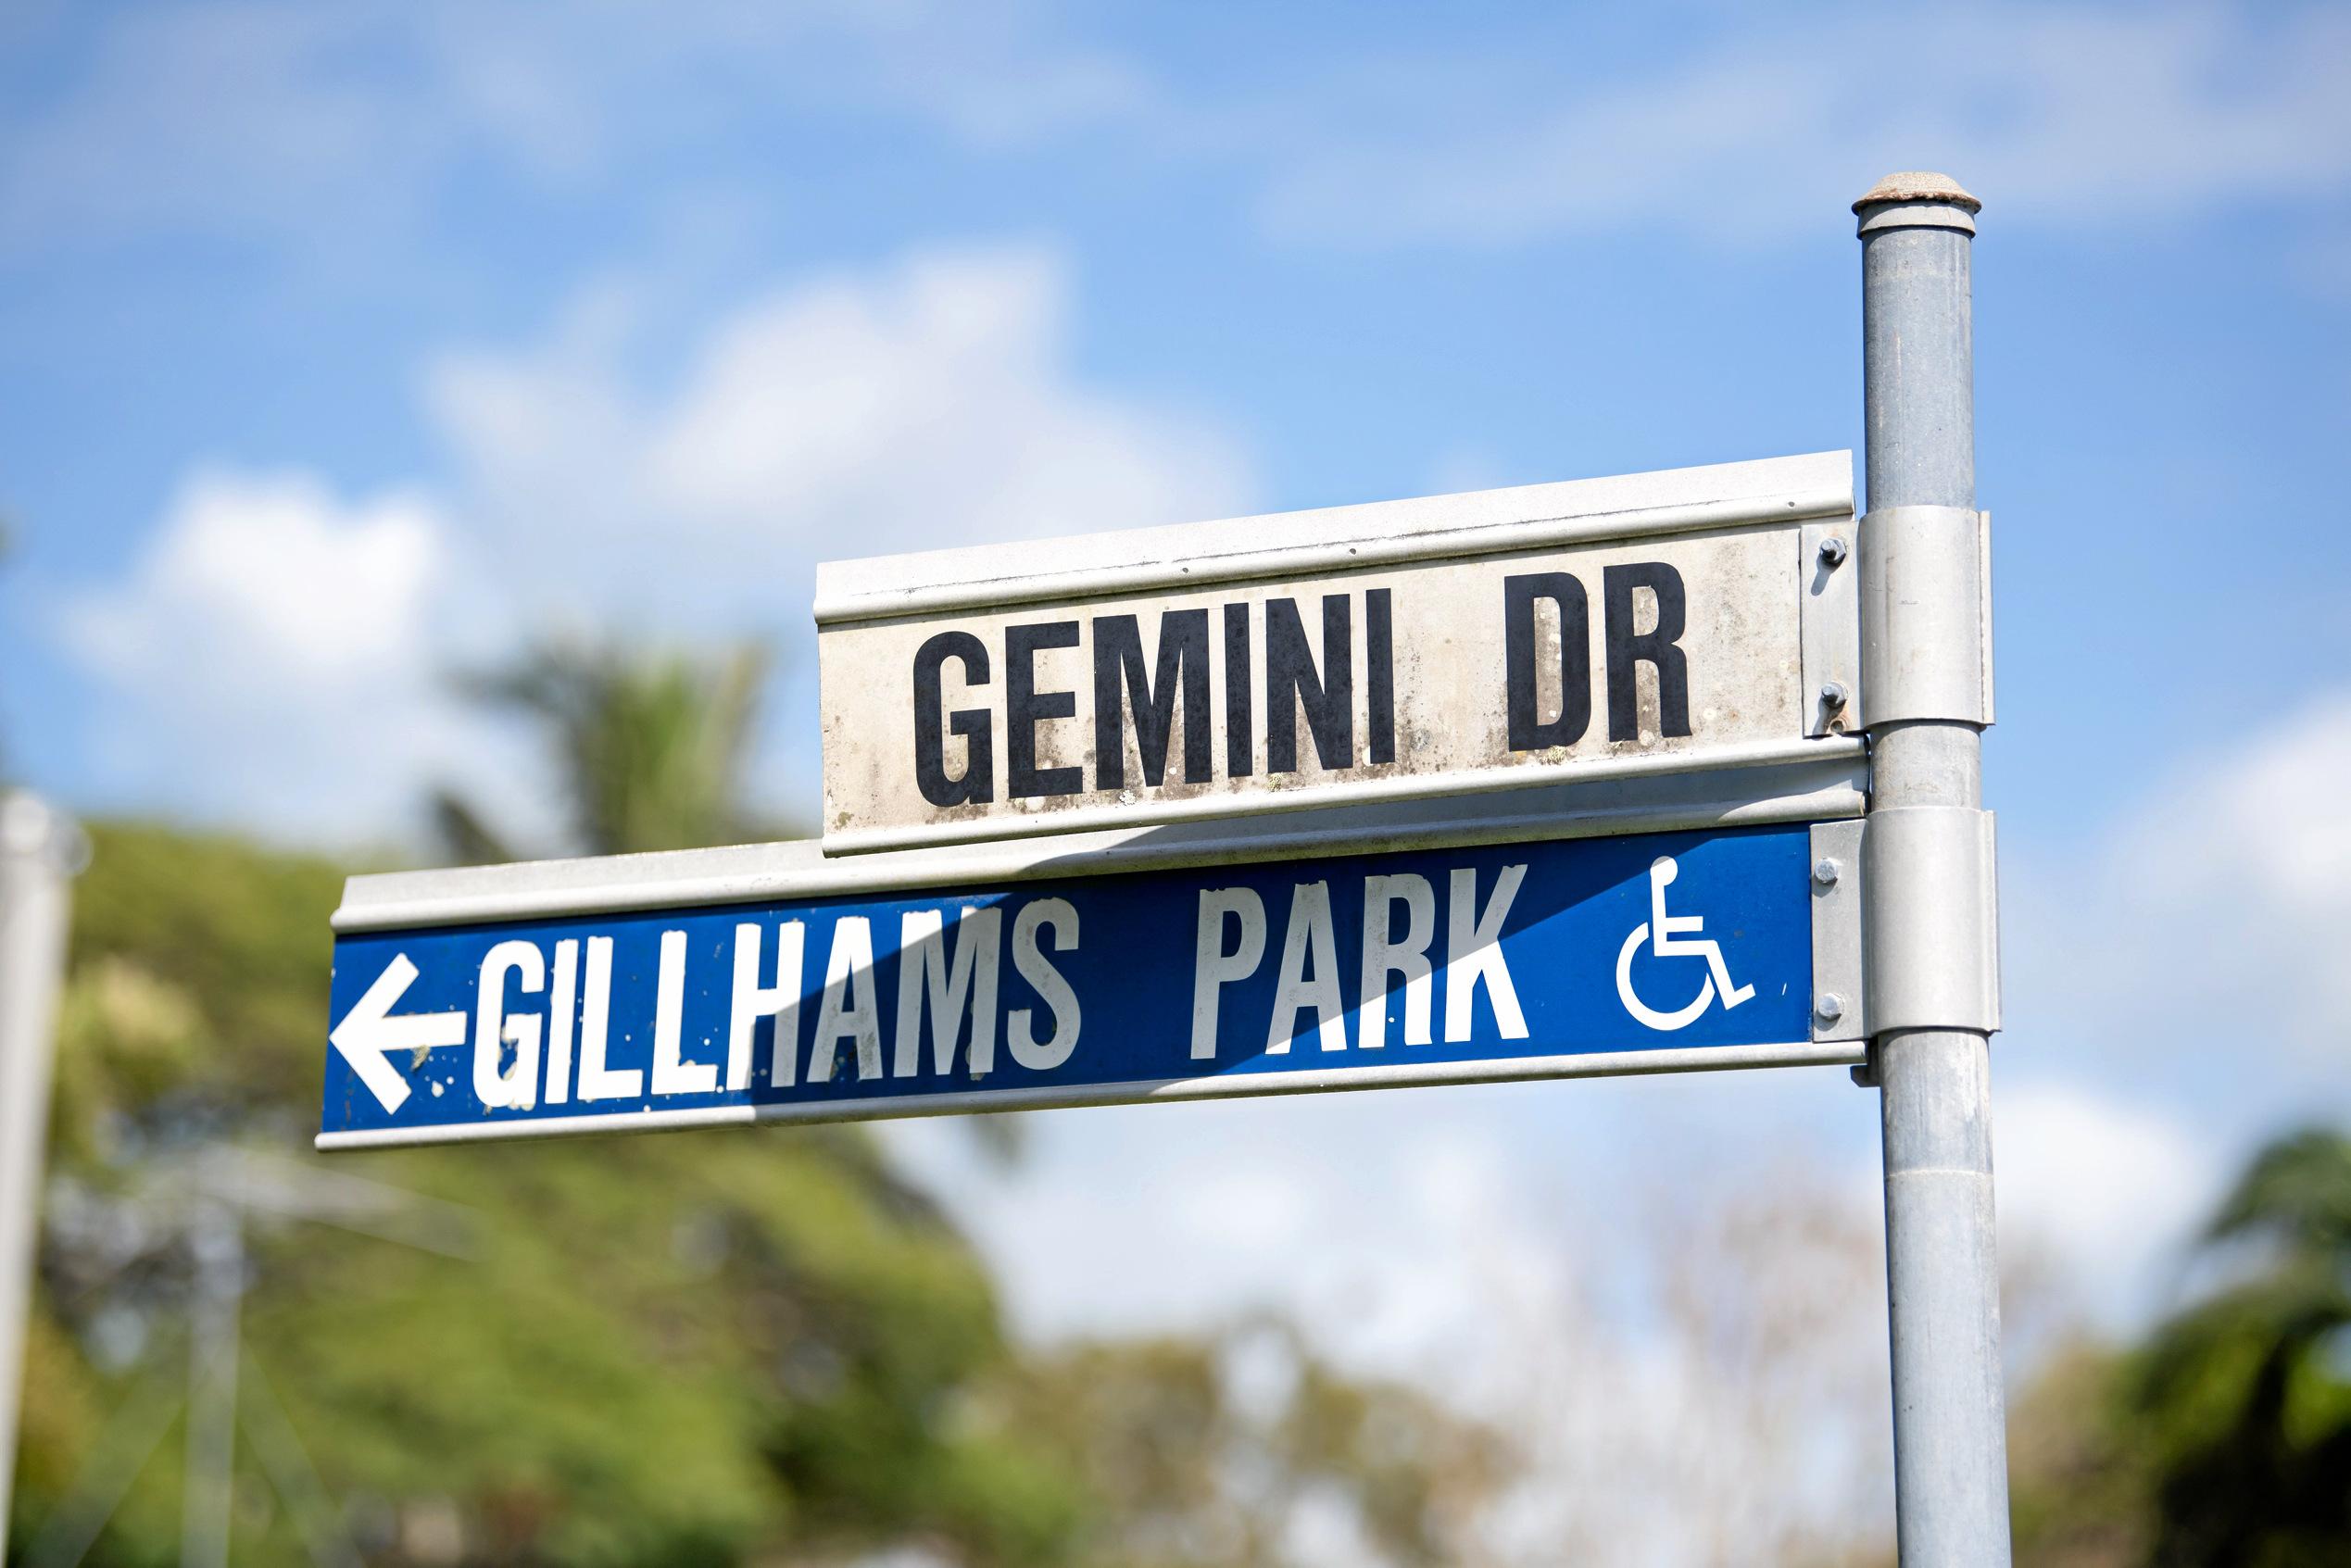 Police are investigating the suspicious death of a 20-year-old man who was allegedly involved in an altercation at an address in Gemini Court in Andergrove on New Year's Eve.